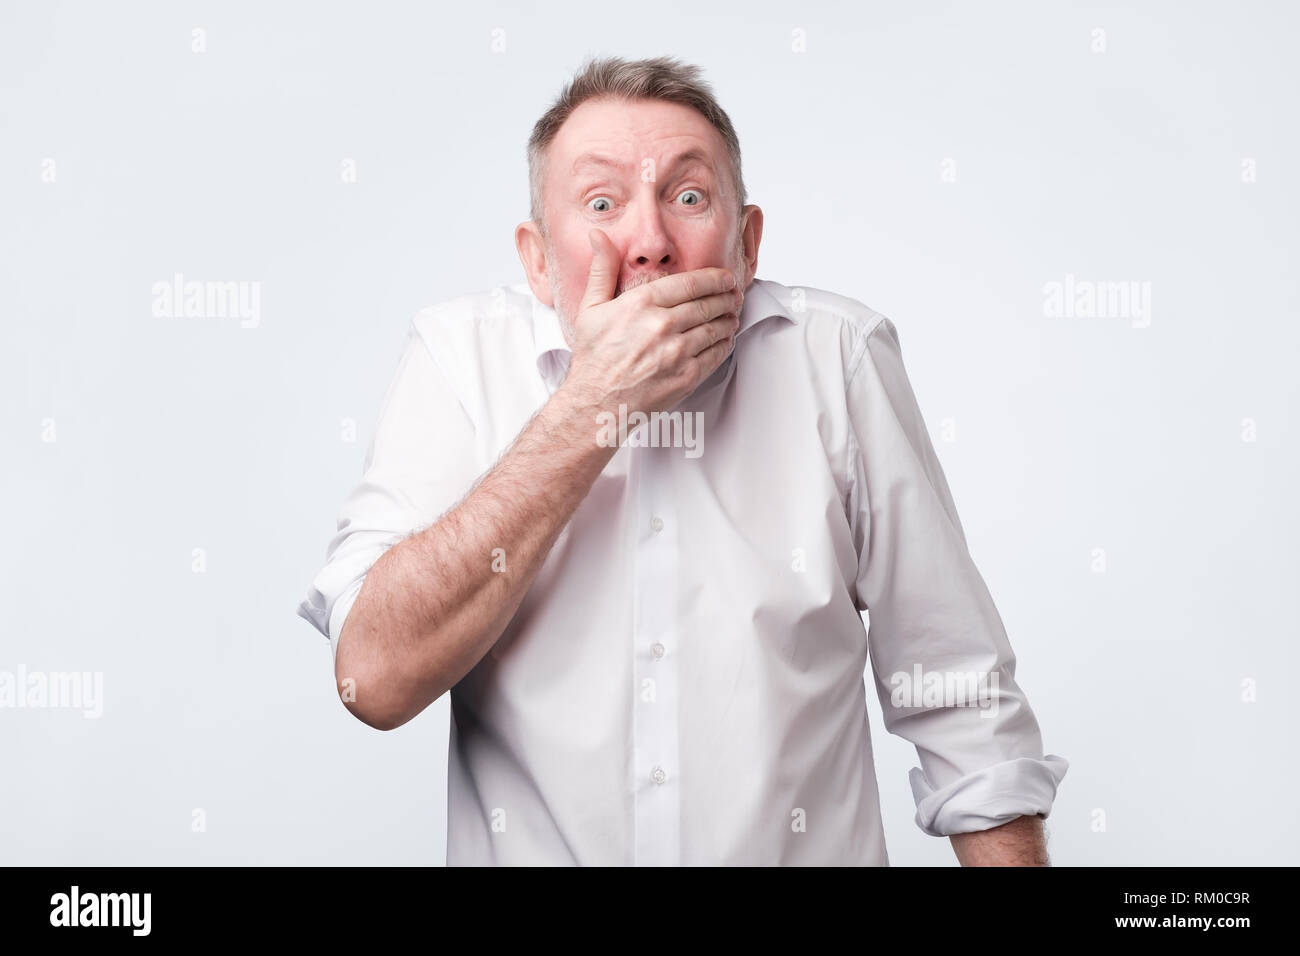 man in white shirt covering mouth with hand and looking at camera Stock Photo